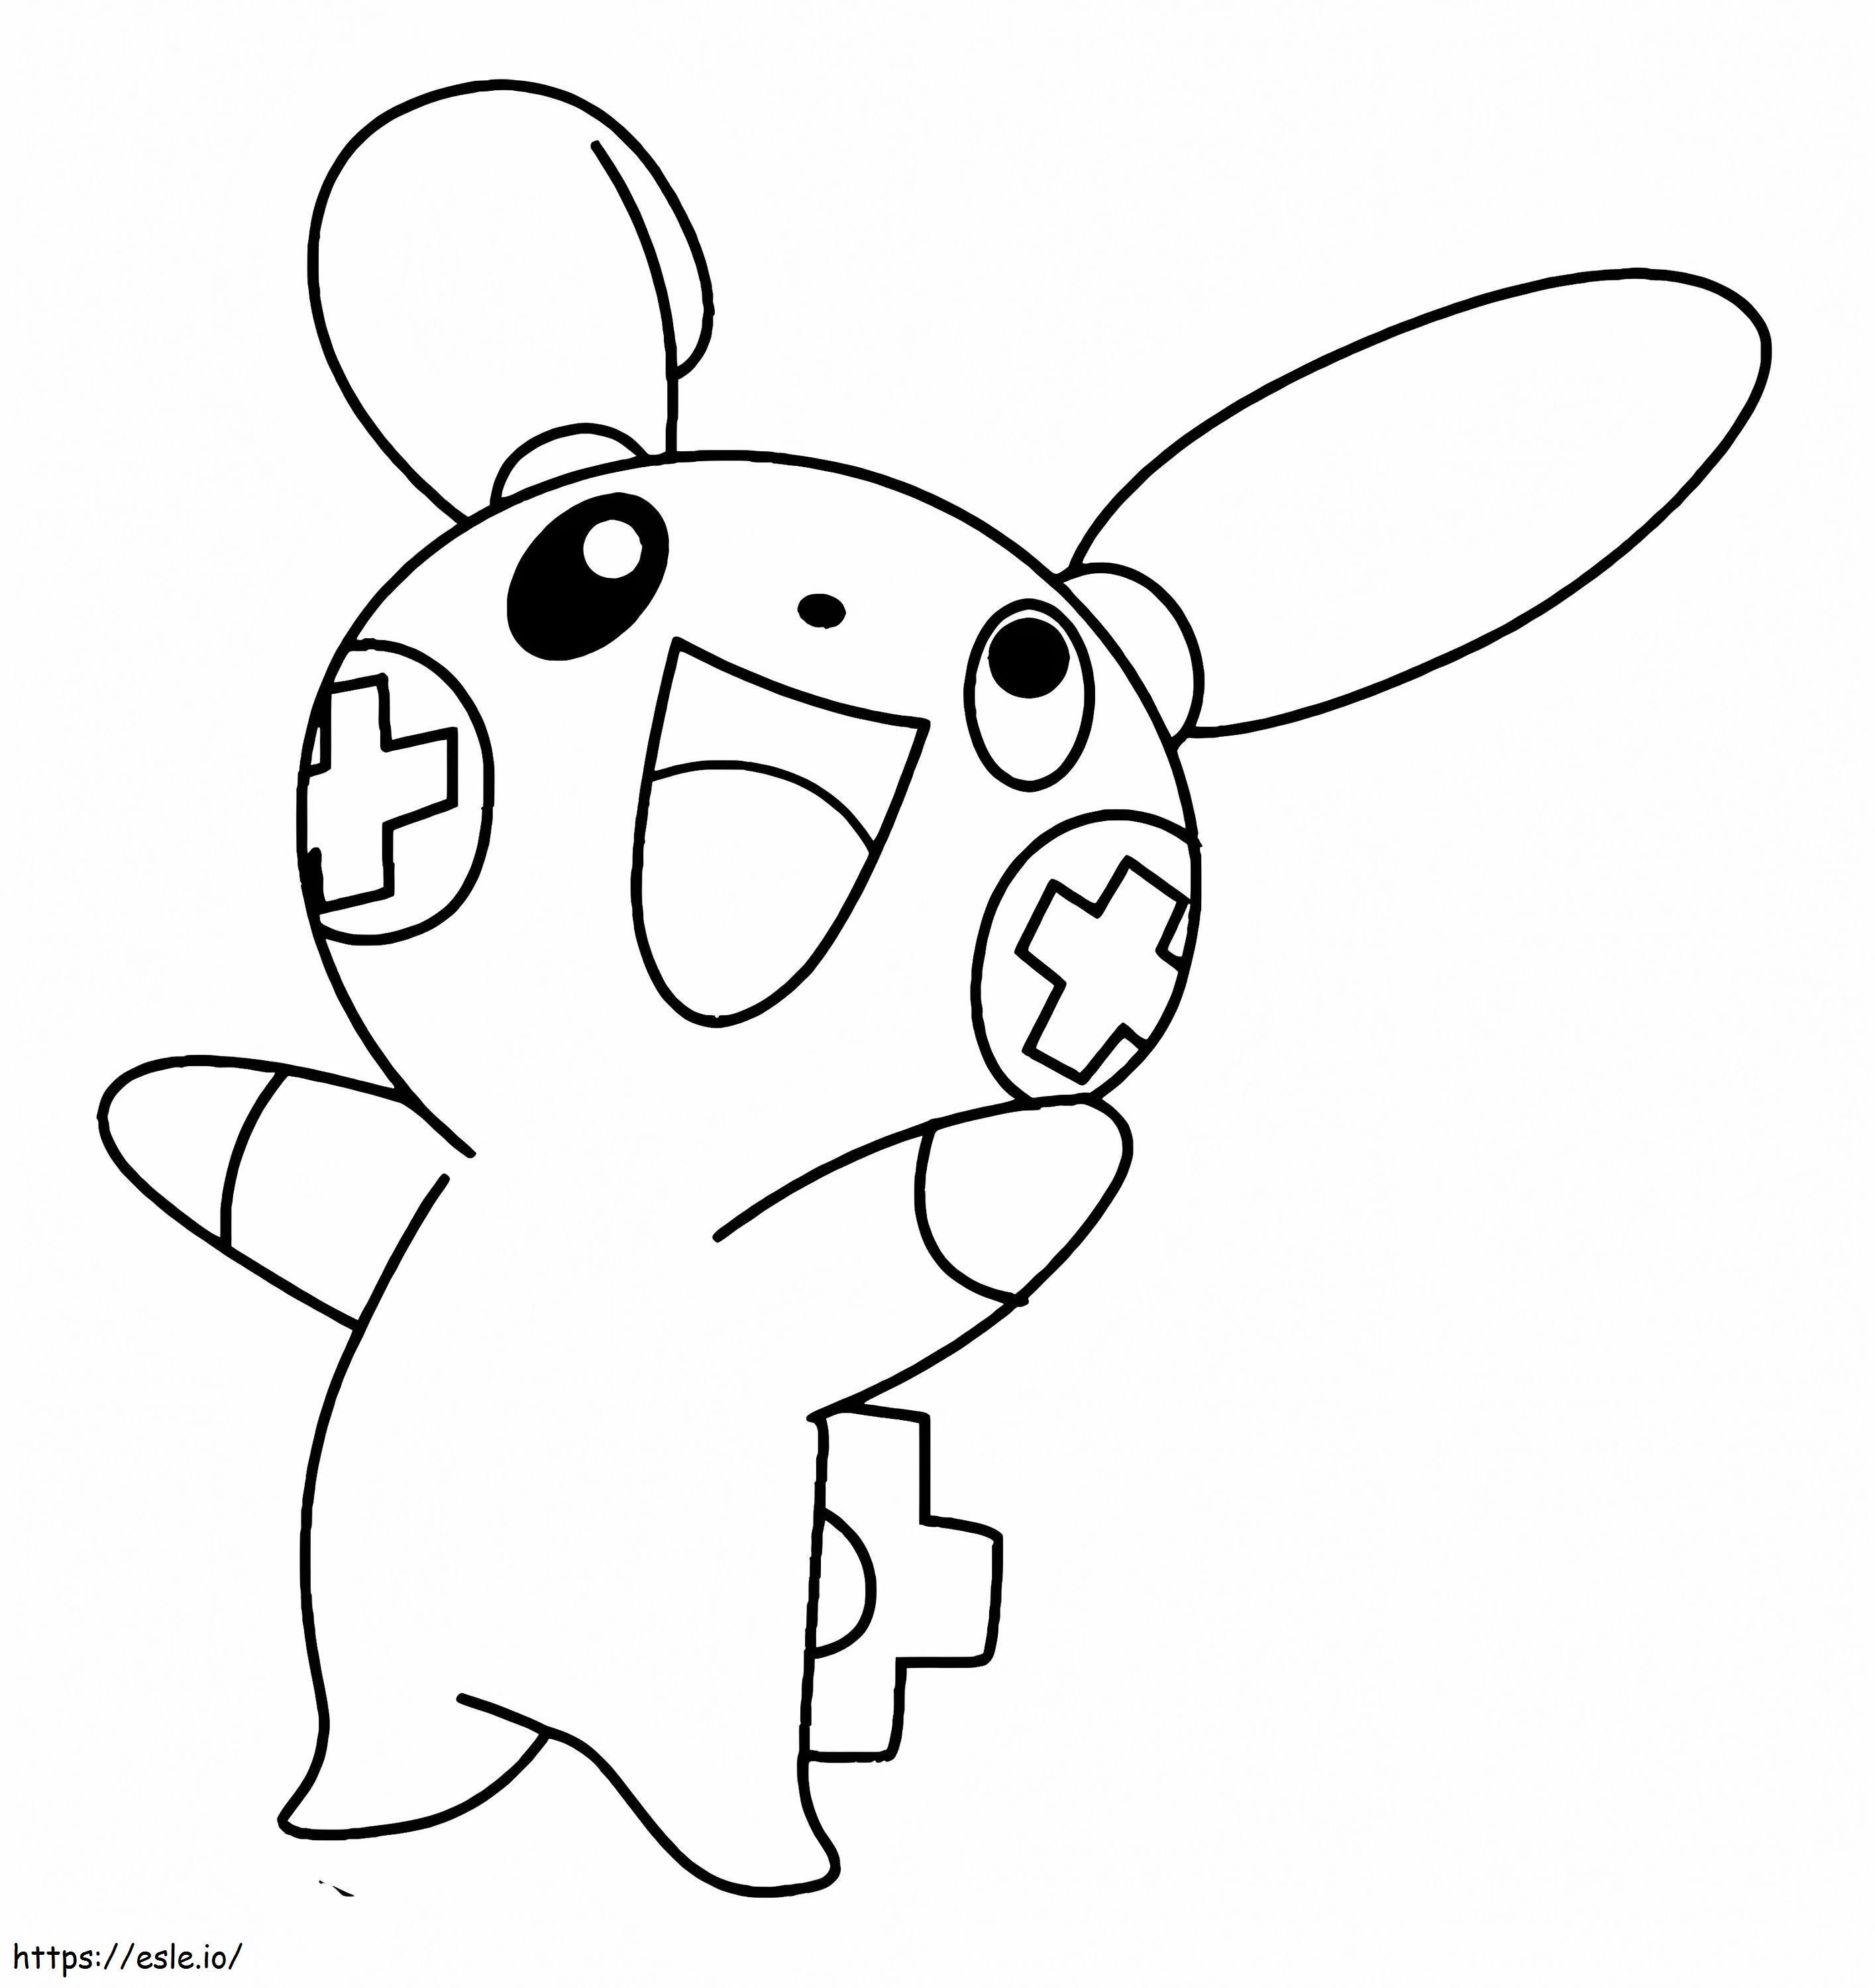 Plusle Pokemon 2 coloring page